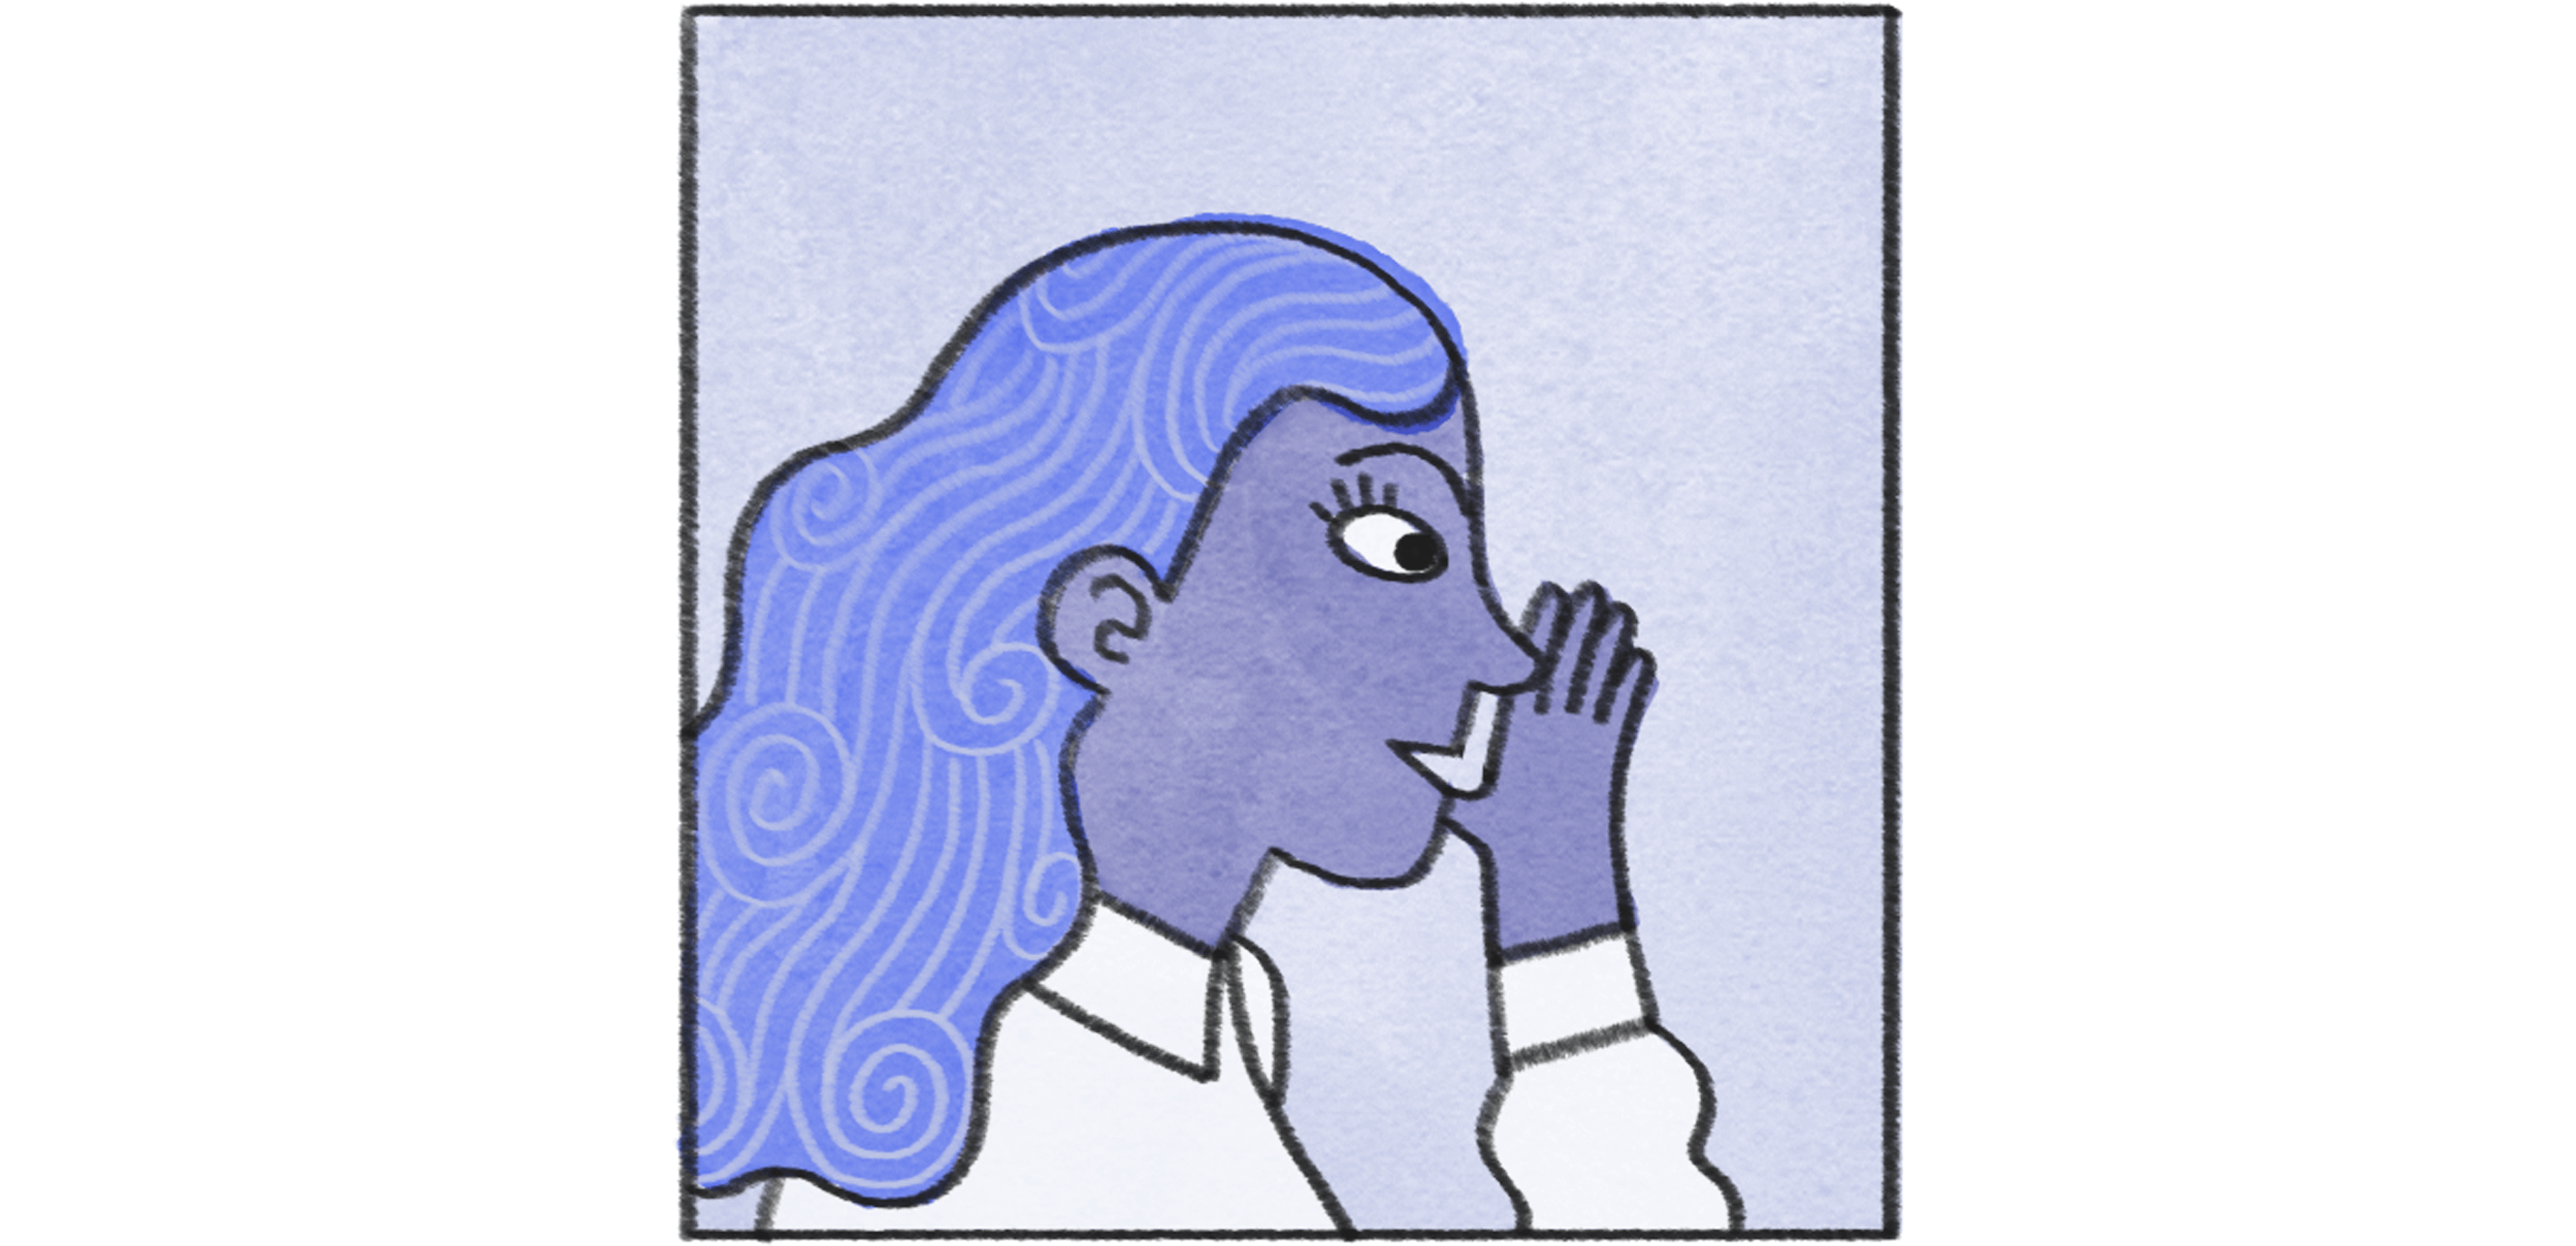 A cutout portion of the cover of the blog showing  a woman holding up a hand next to her mouth to whisper.